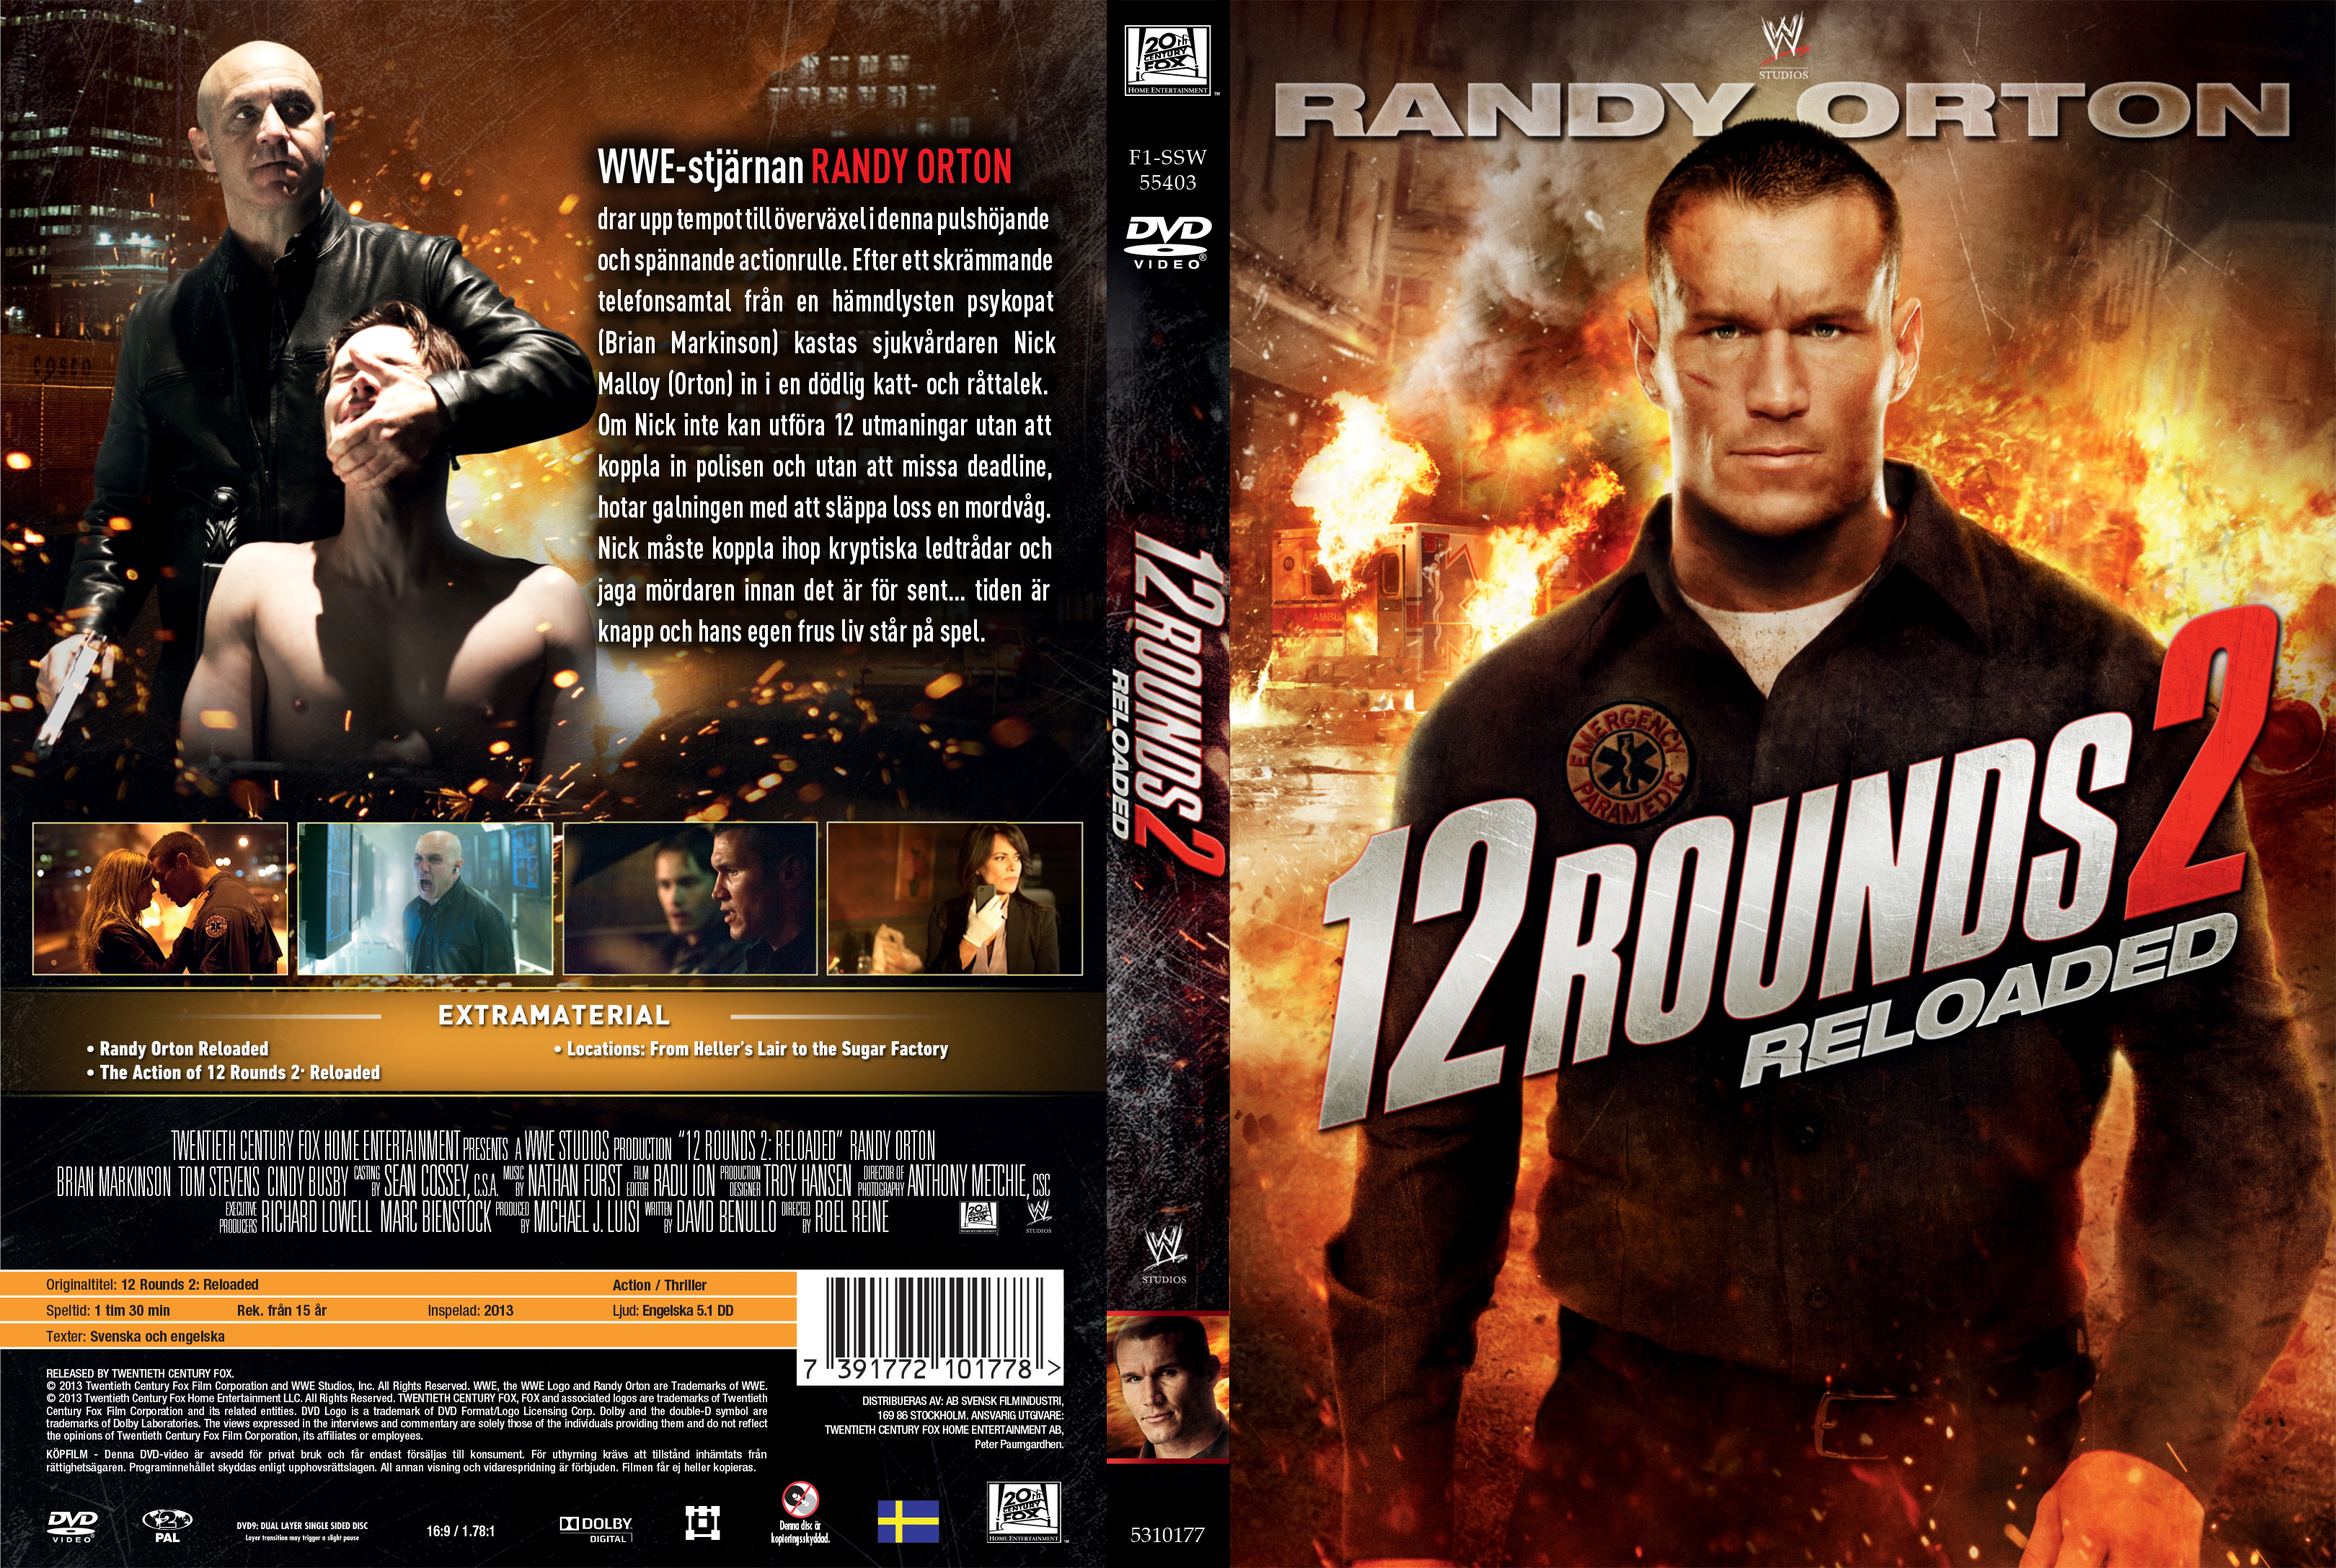 COVERS.BOX.SK ::: 12 rounds 2 reloaded 2013 - high quality DVD / Blueray /  Movie